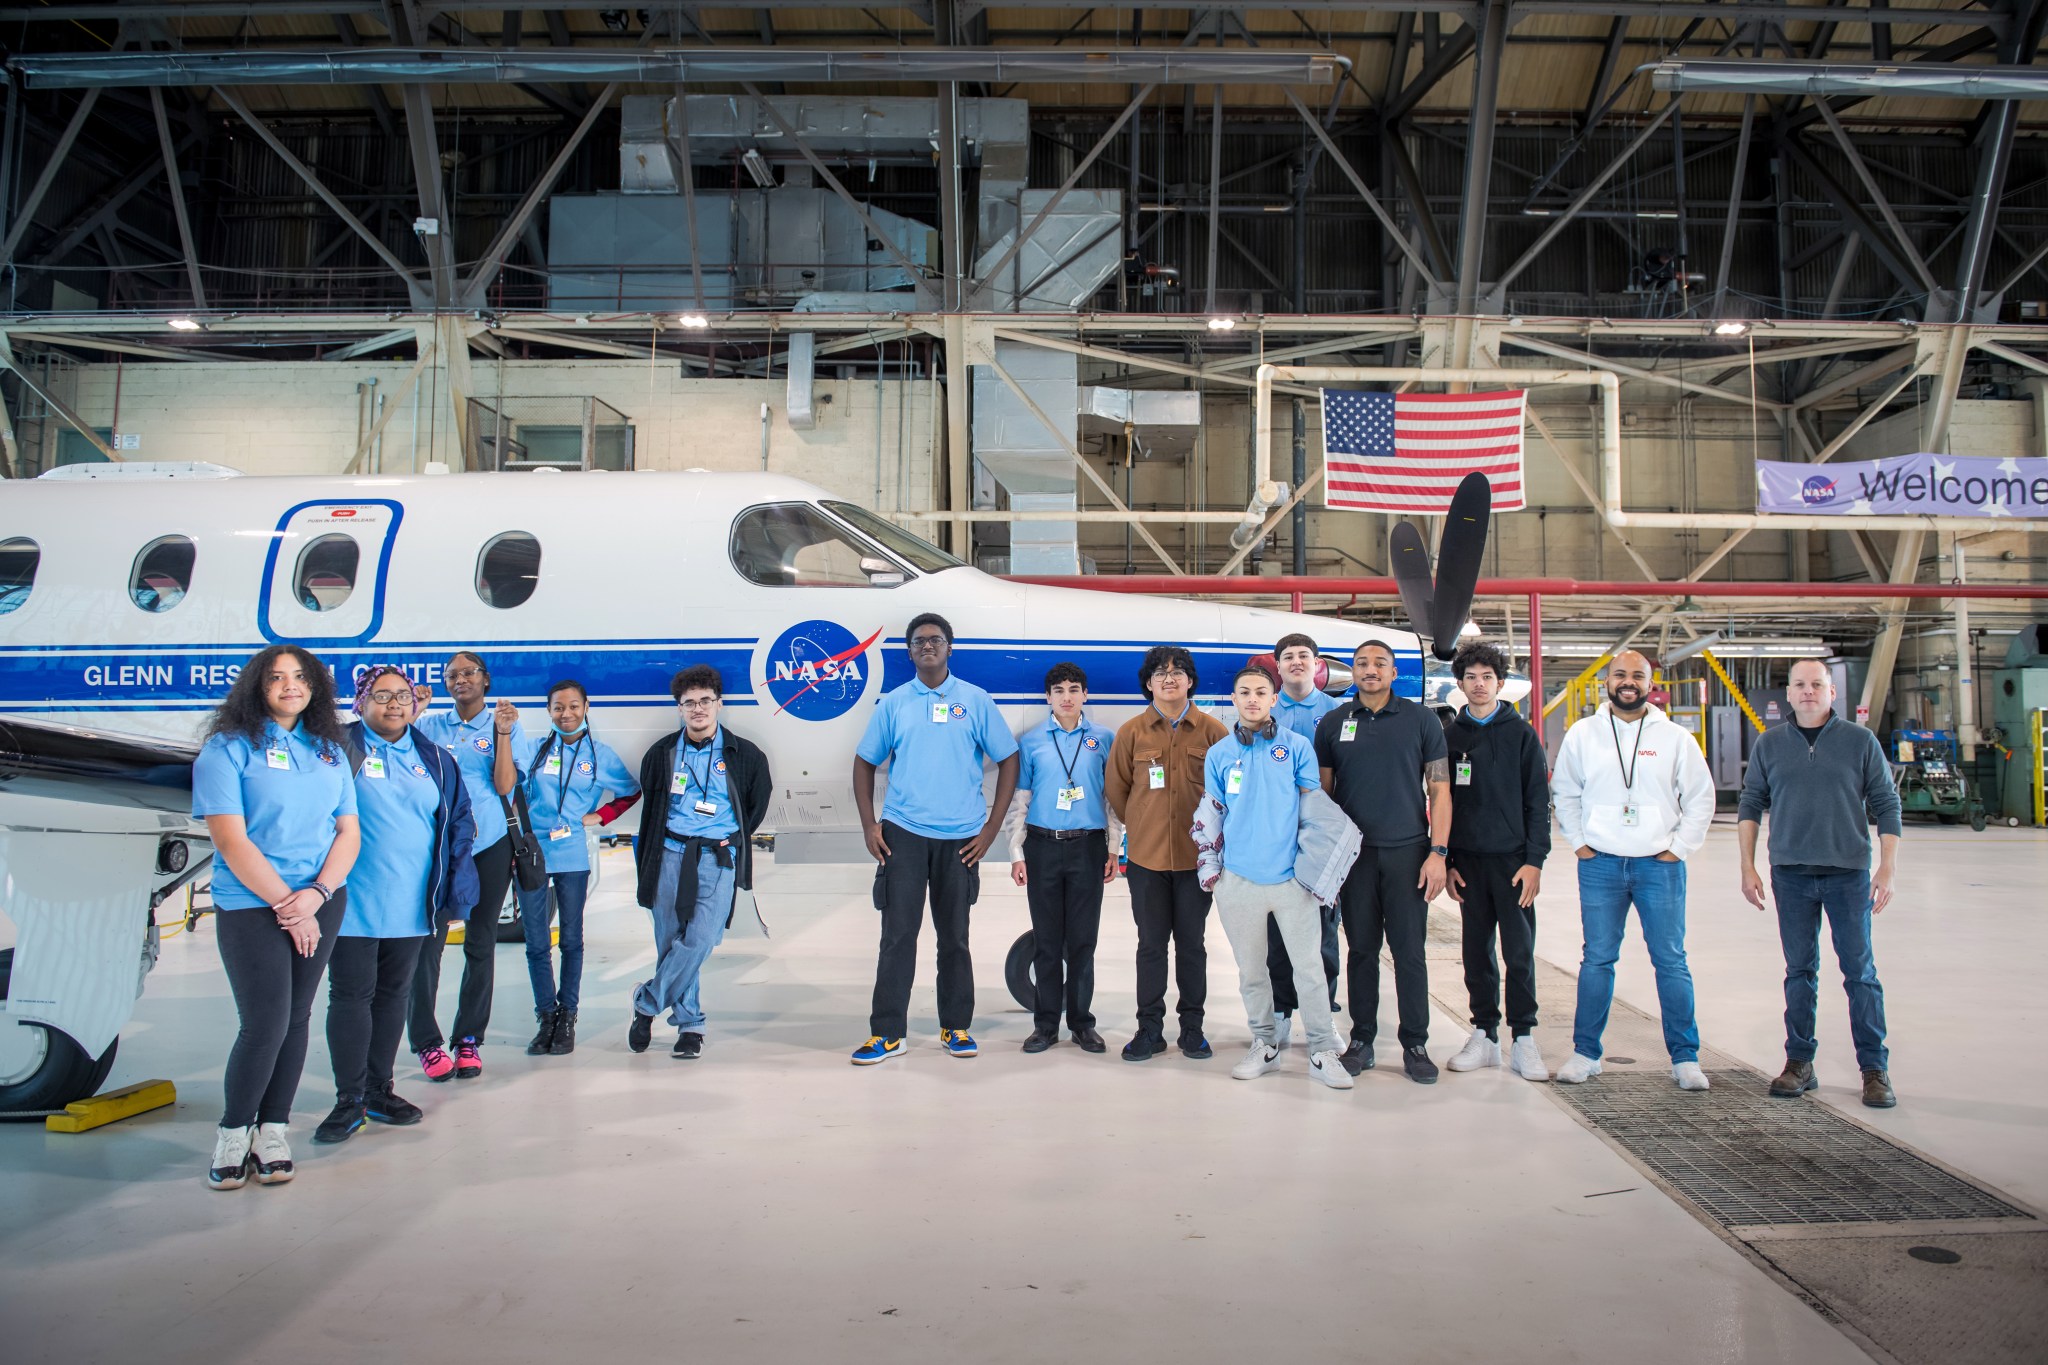 A group of high school students dressed in blue shirts and dark pants pose in front of a small airplane in a hangar at NASA’s Glenn Research Center.